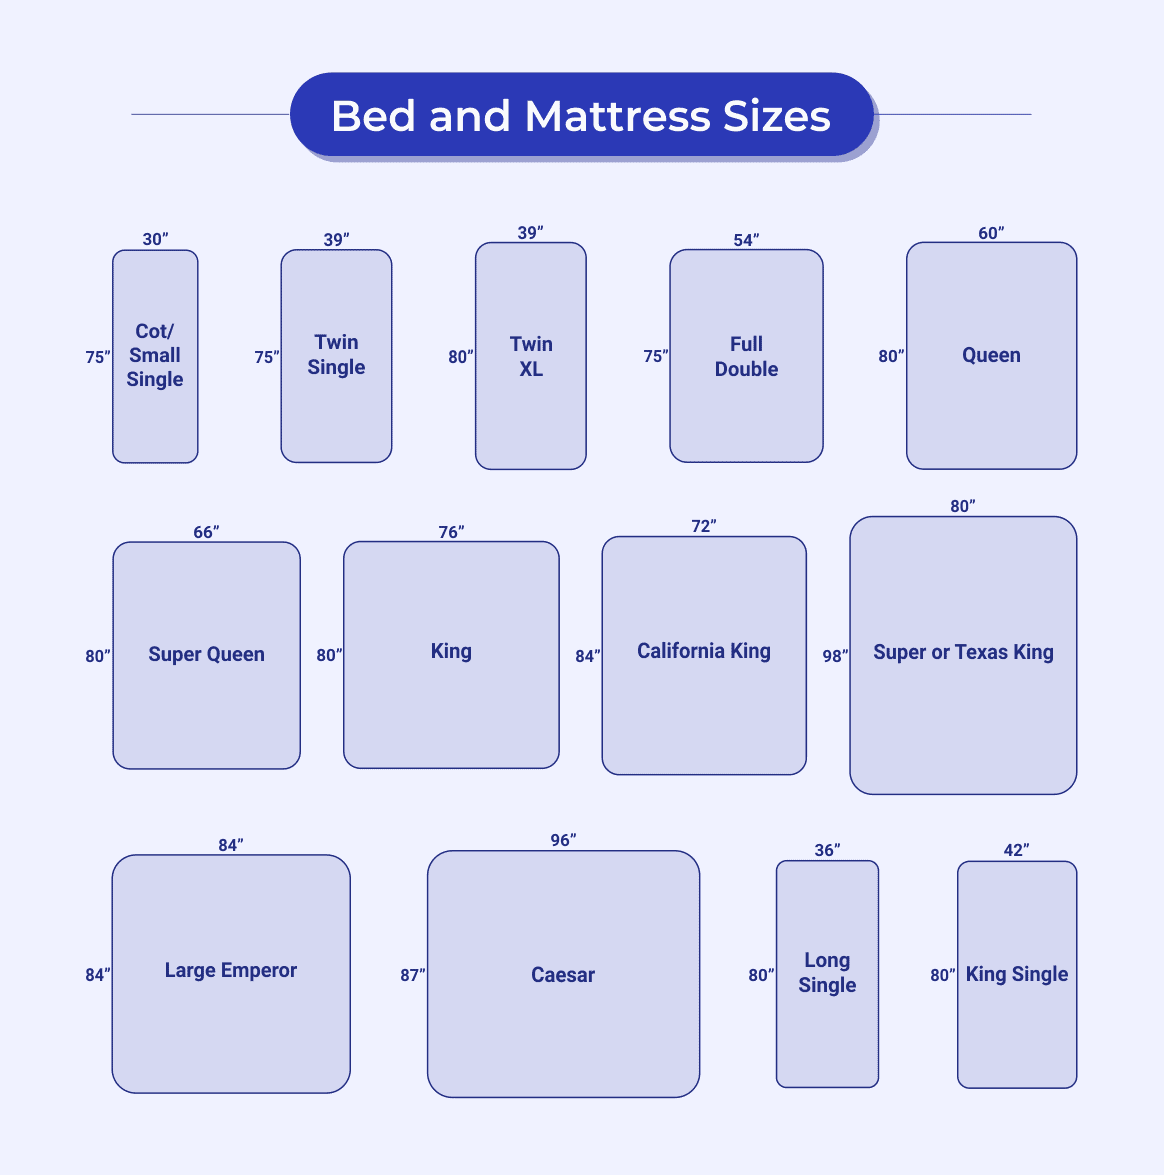 Mattress And Bed Sizes What Are The, The Width Of A King Size Bed